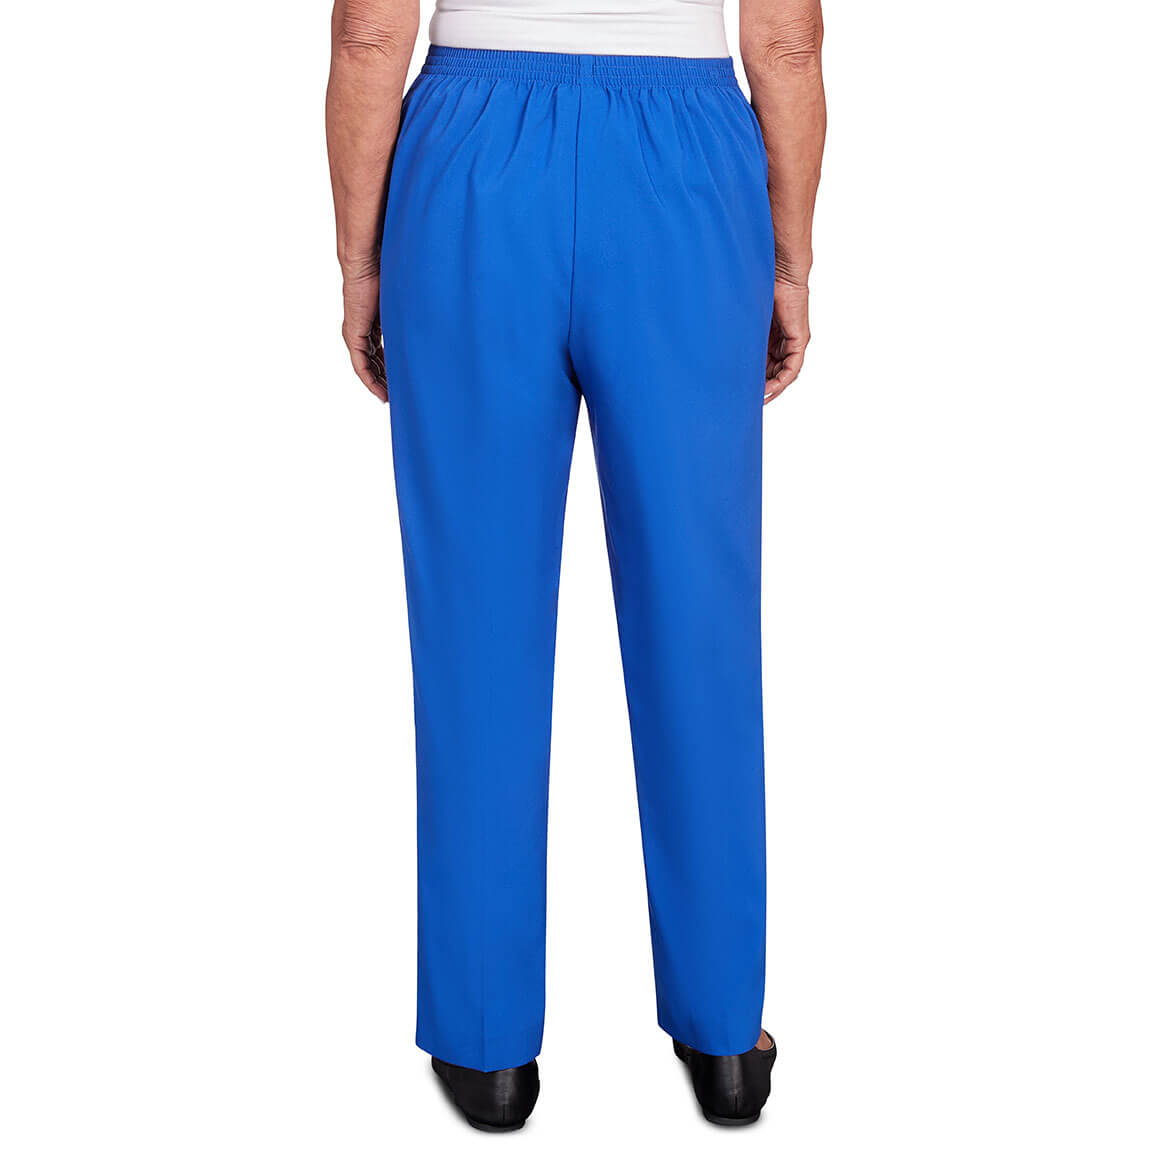 Tradewinds Pull-On Ankle Pant